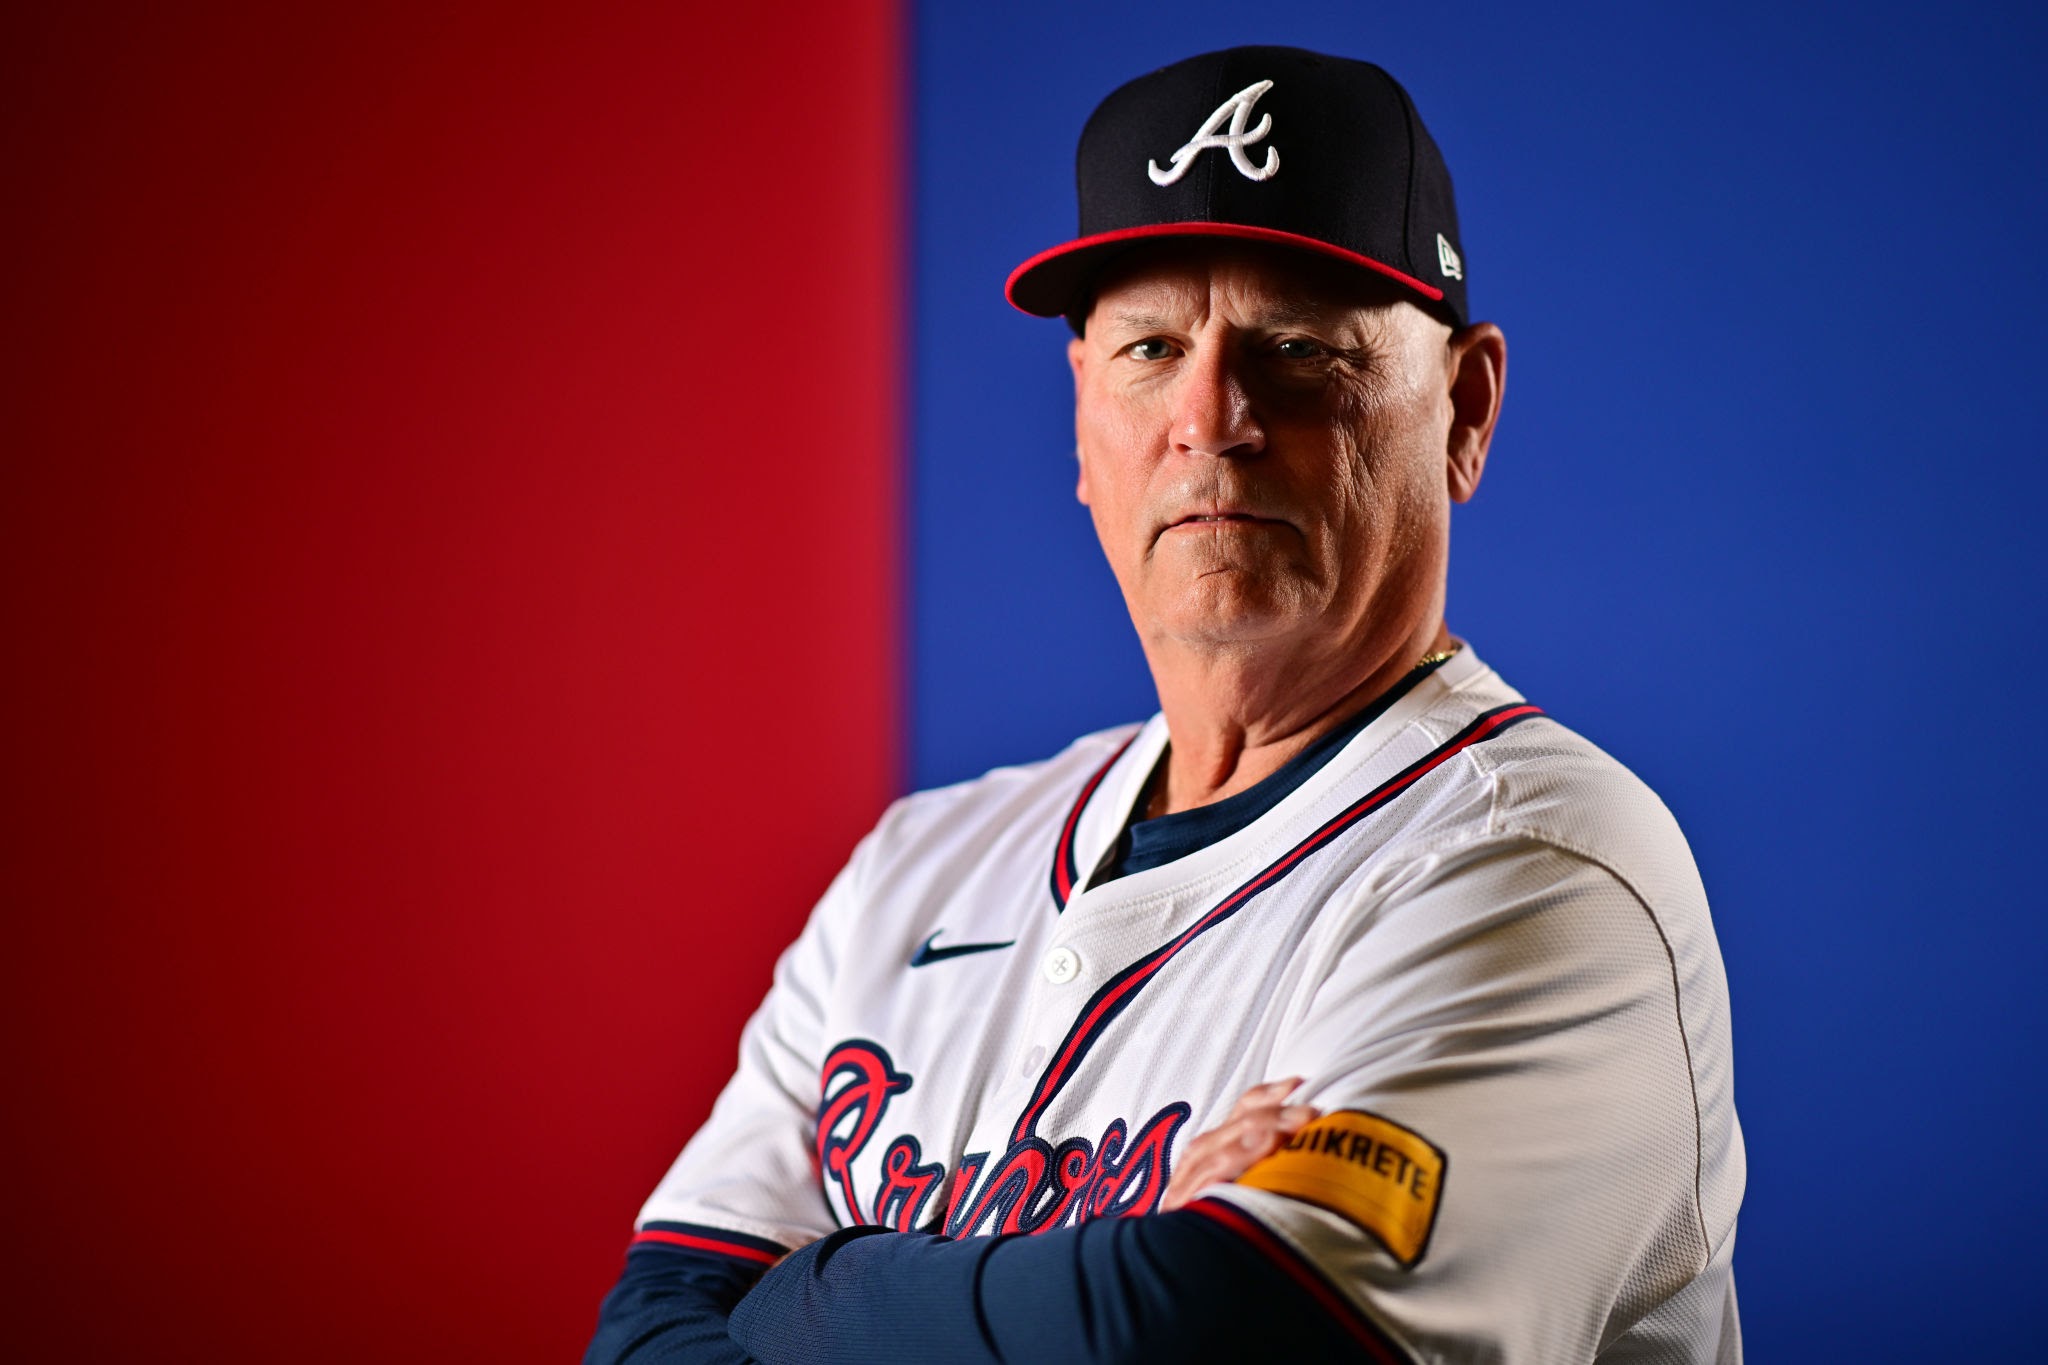 Done Deal: Atlanta Braves has Completely signed another baseball legend…